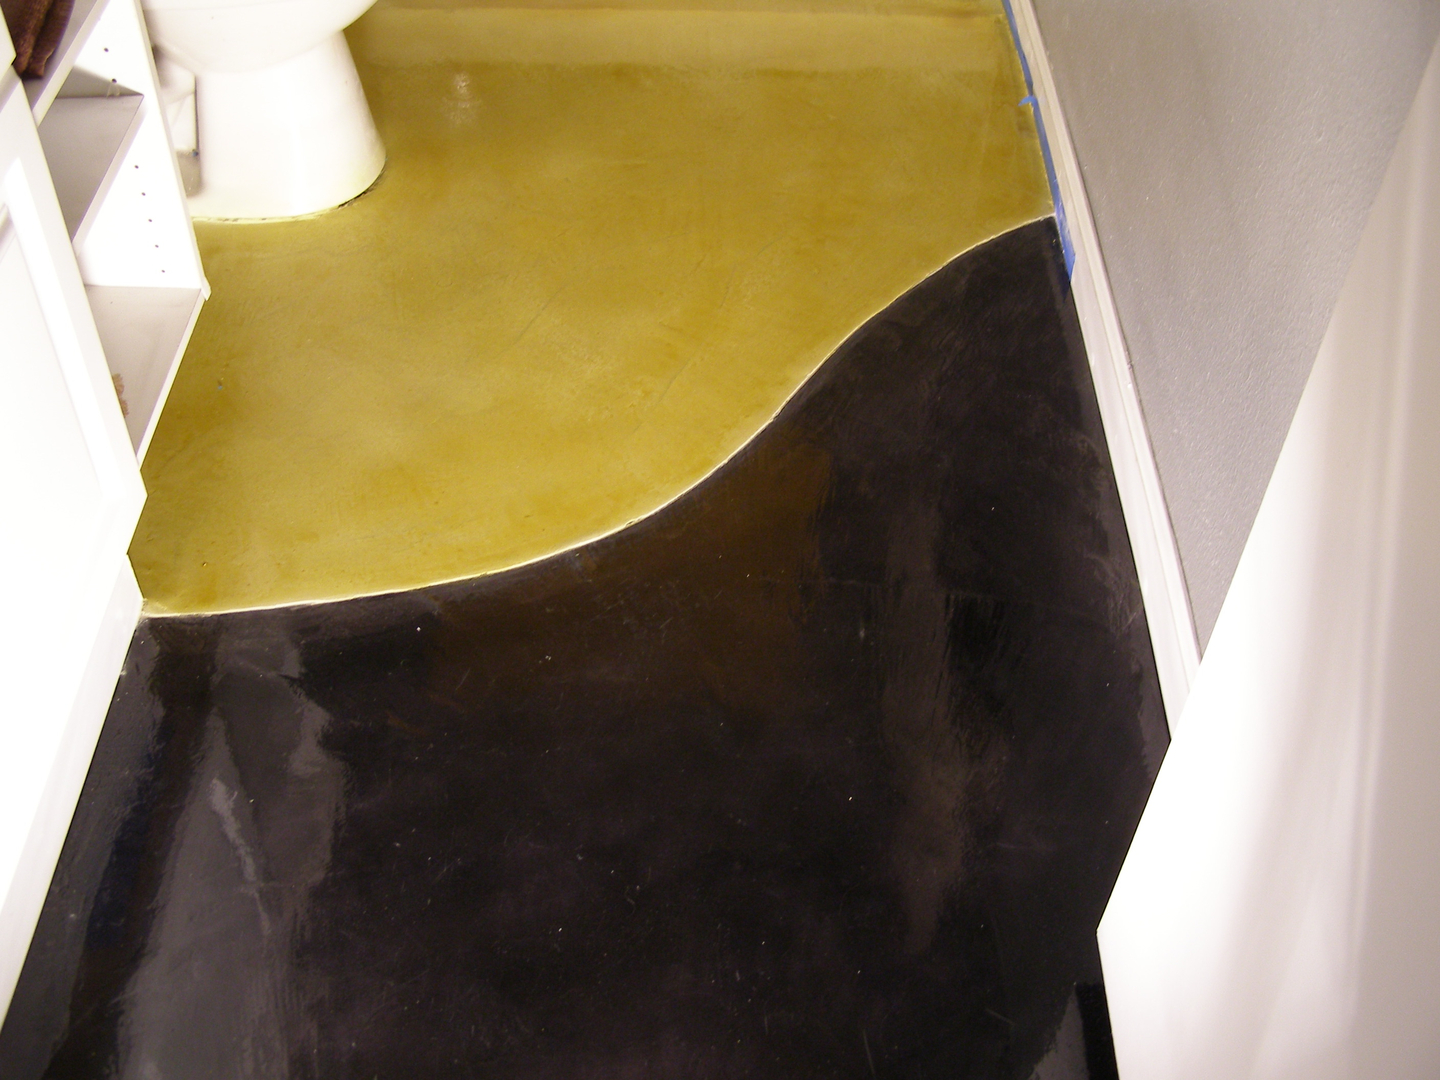 A Black Yellow Pattern Floor for the Bathroom